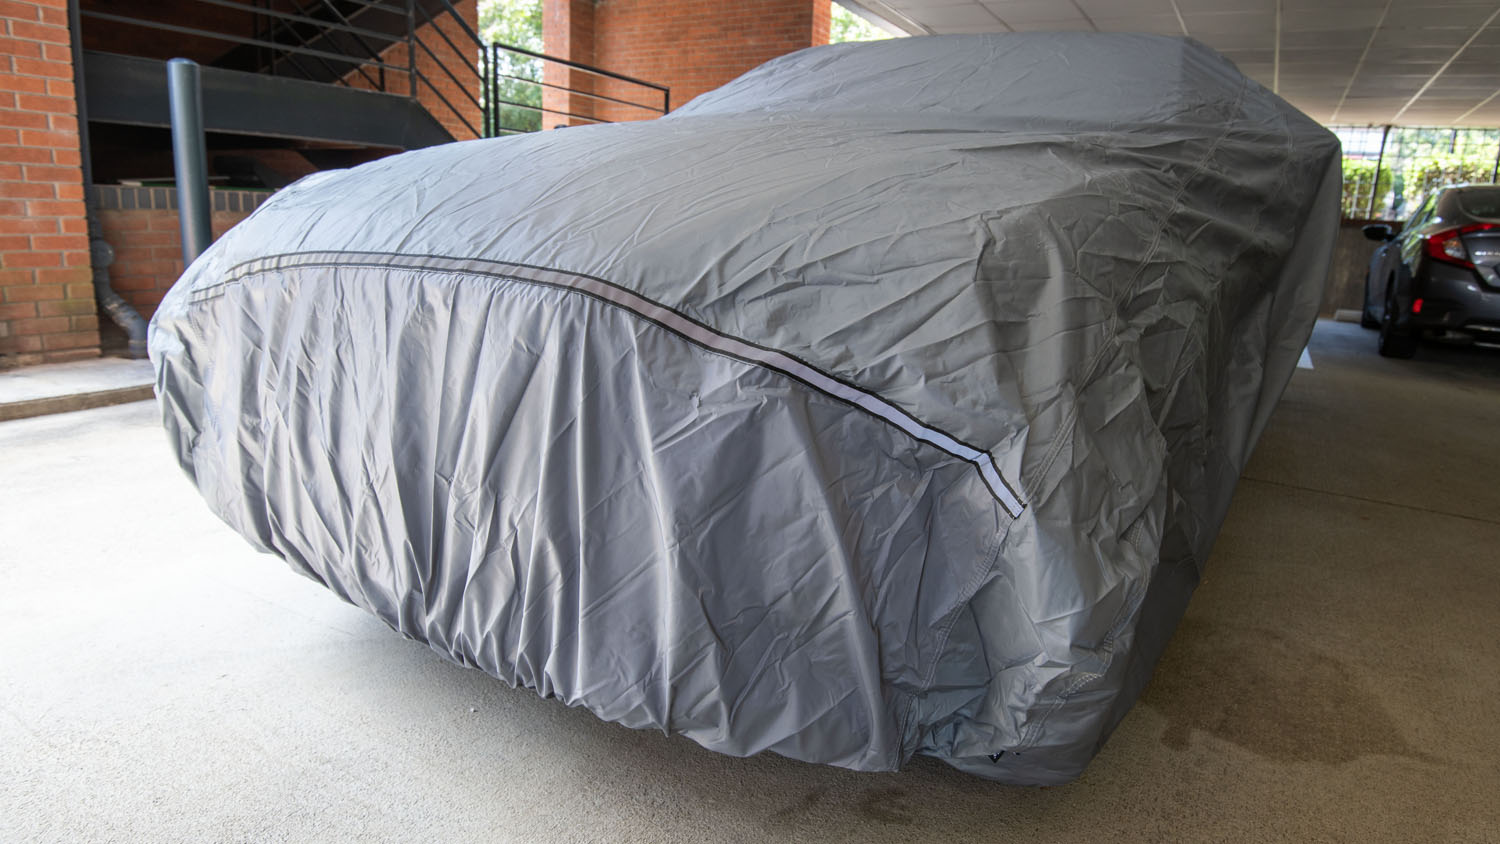 Tour Performance Car Cover installed on a testing vehicle.